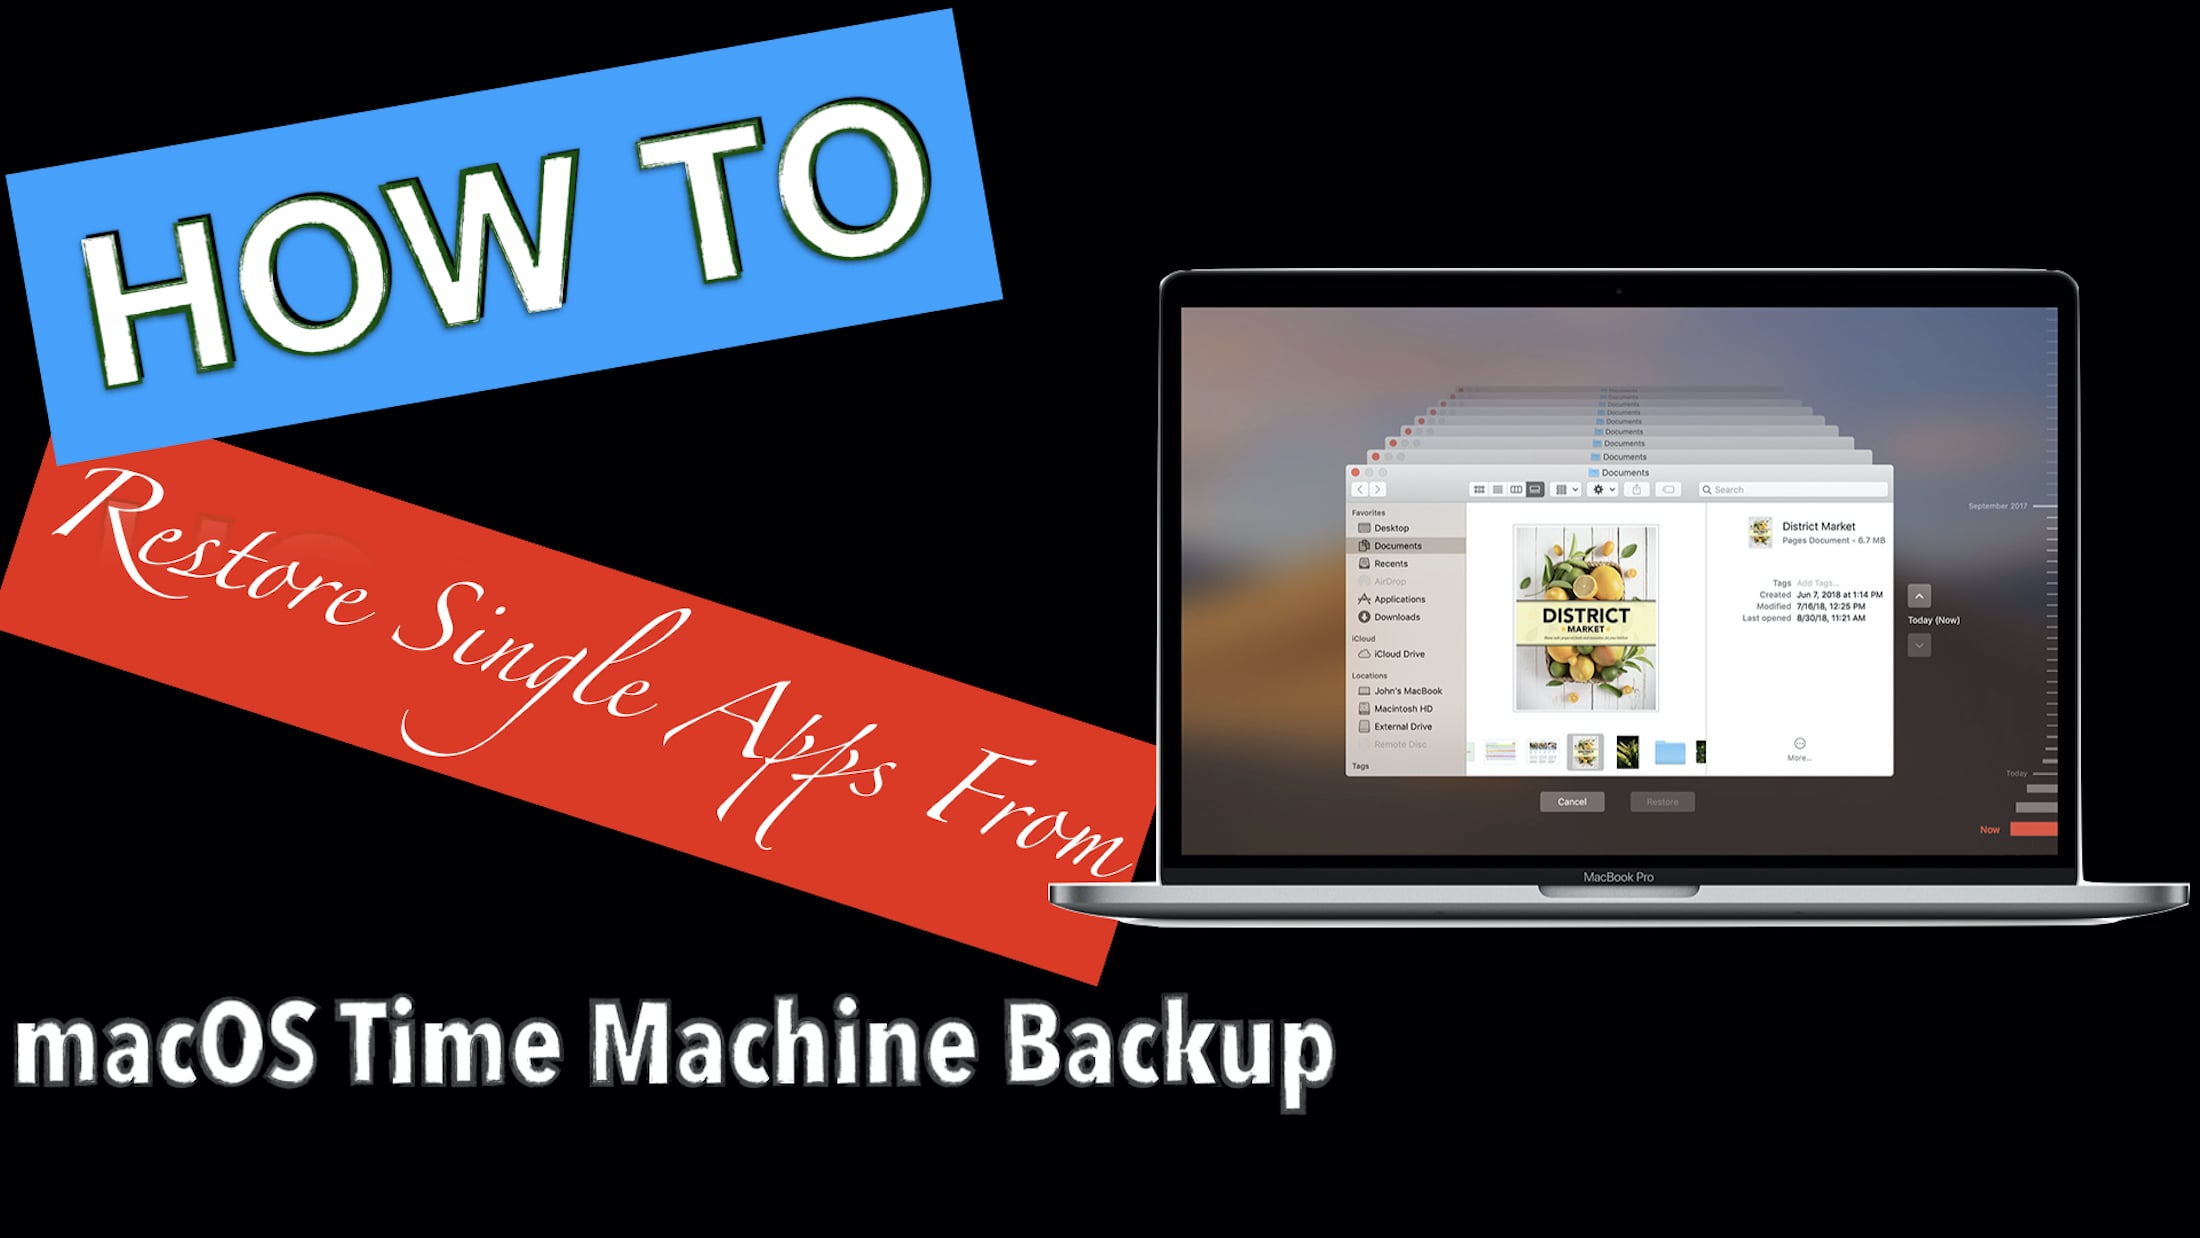 restore macos from time machine backup